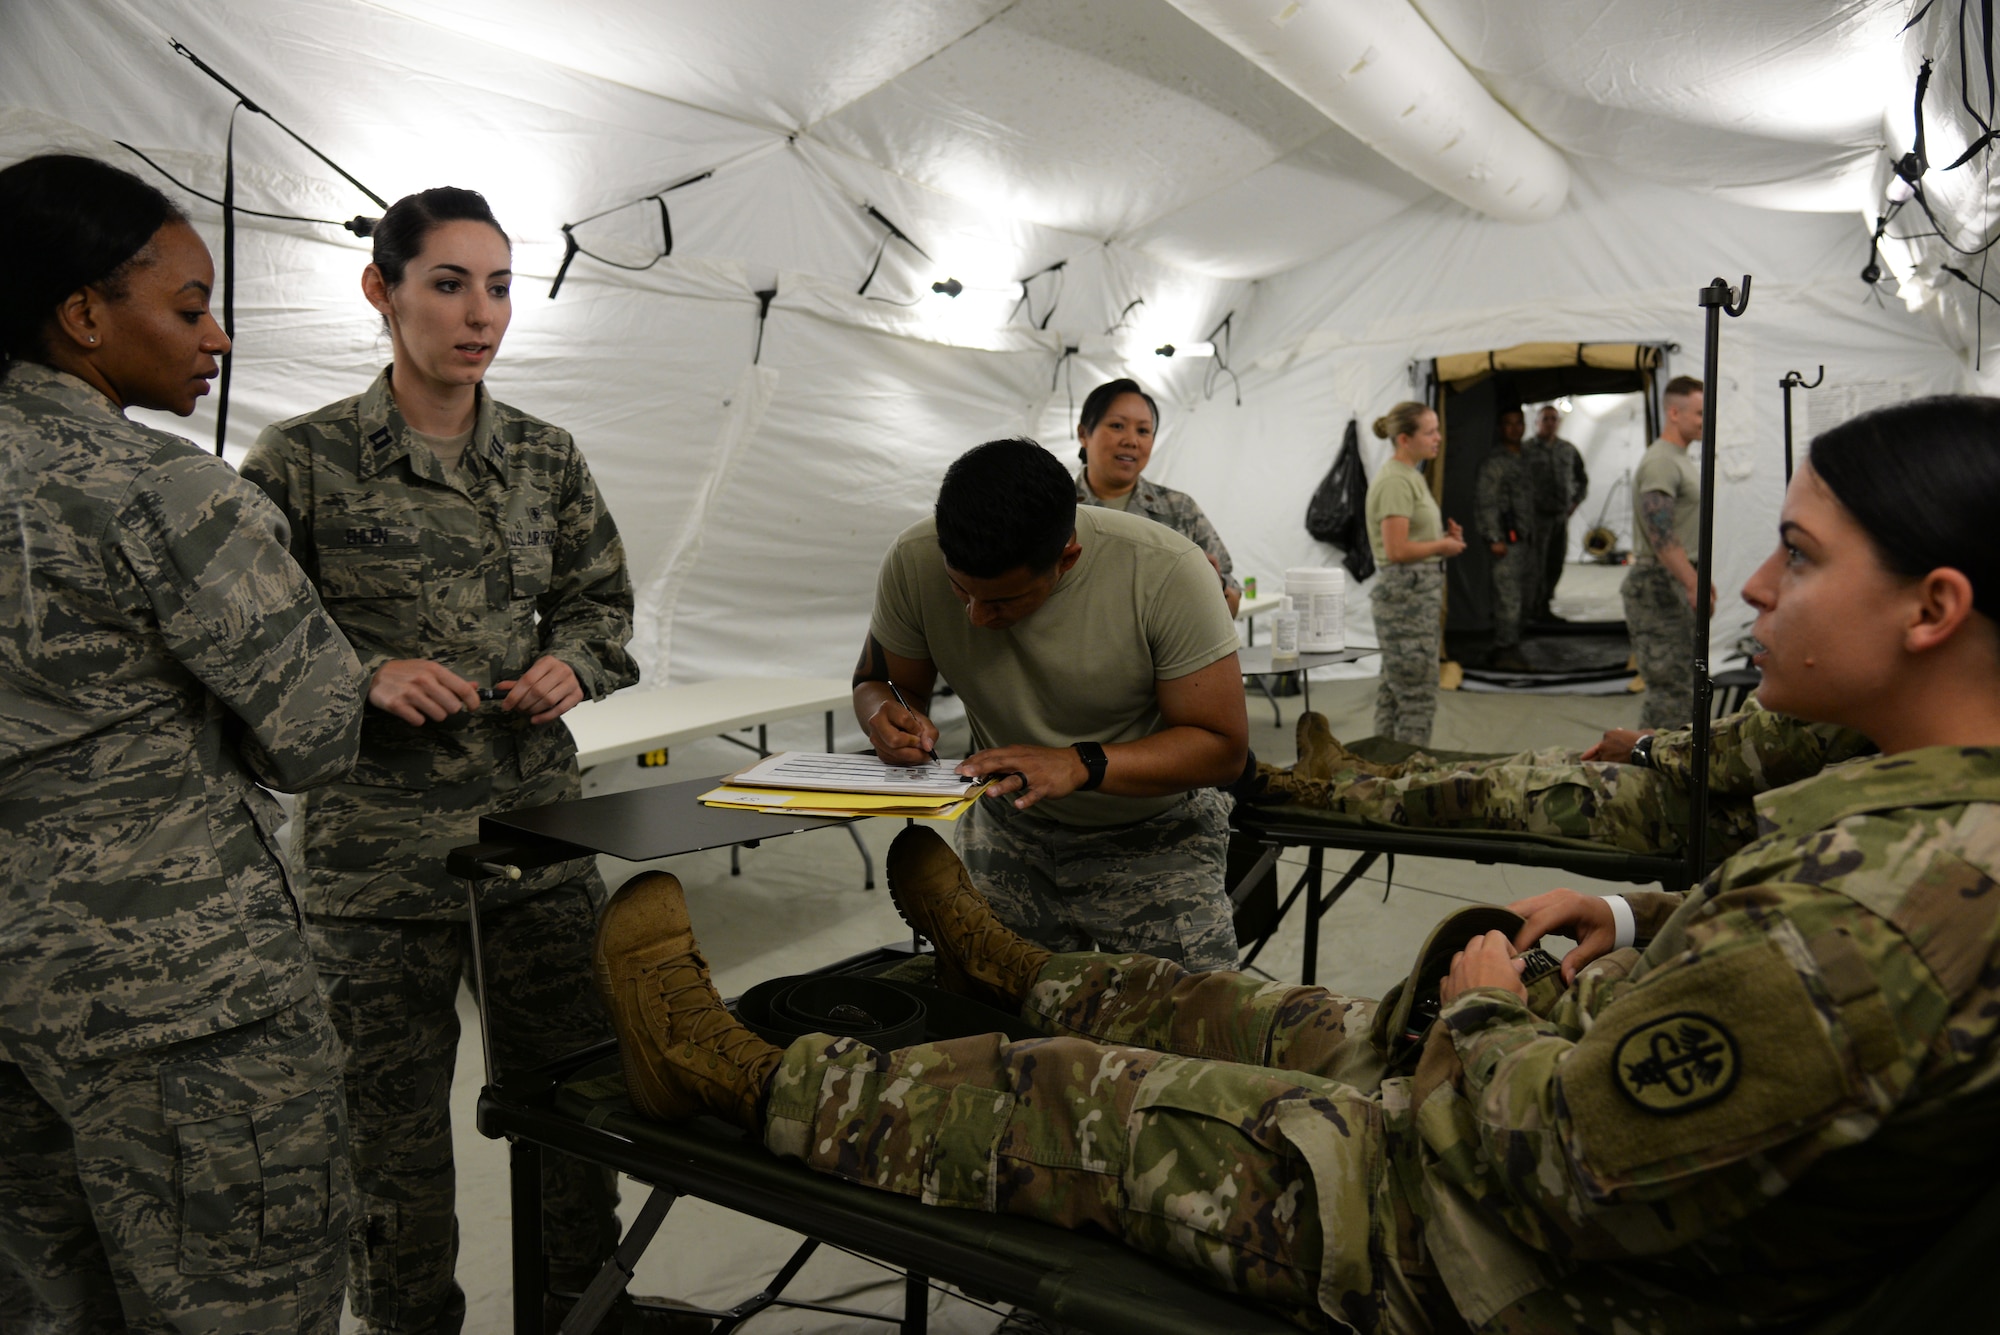 Airmen from the 86th Medical Group treat a patient with simulated minor injuries in an Expeditionary Medical Support System modular field hospital during en route patient staging training during Exercise Maroon Surge on Ramstein Air Base, Germany, June 9, 2018. Treatment at an EMEDS is a vital step in the en route care continuum, getting patients prepped for aeromedical evacuation to higher level of care. (U.S. Air Force photo by Airman 1st Class Ariel Leighty)